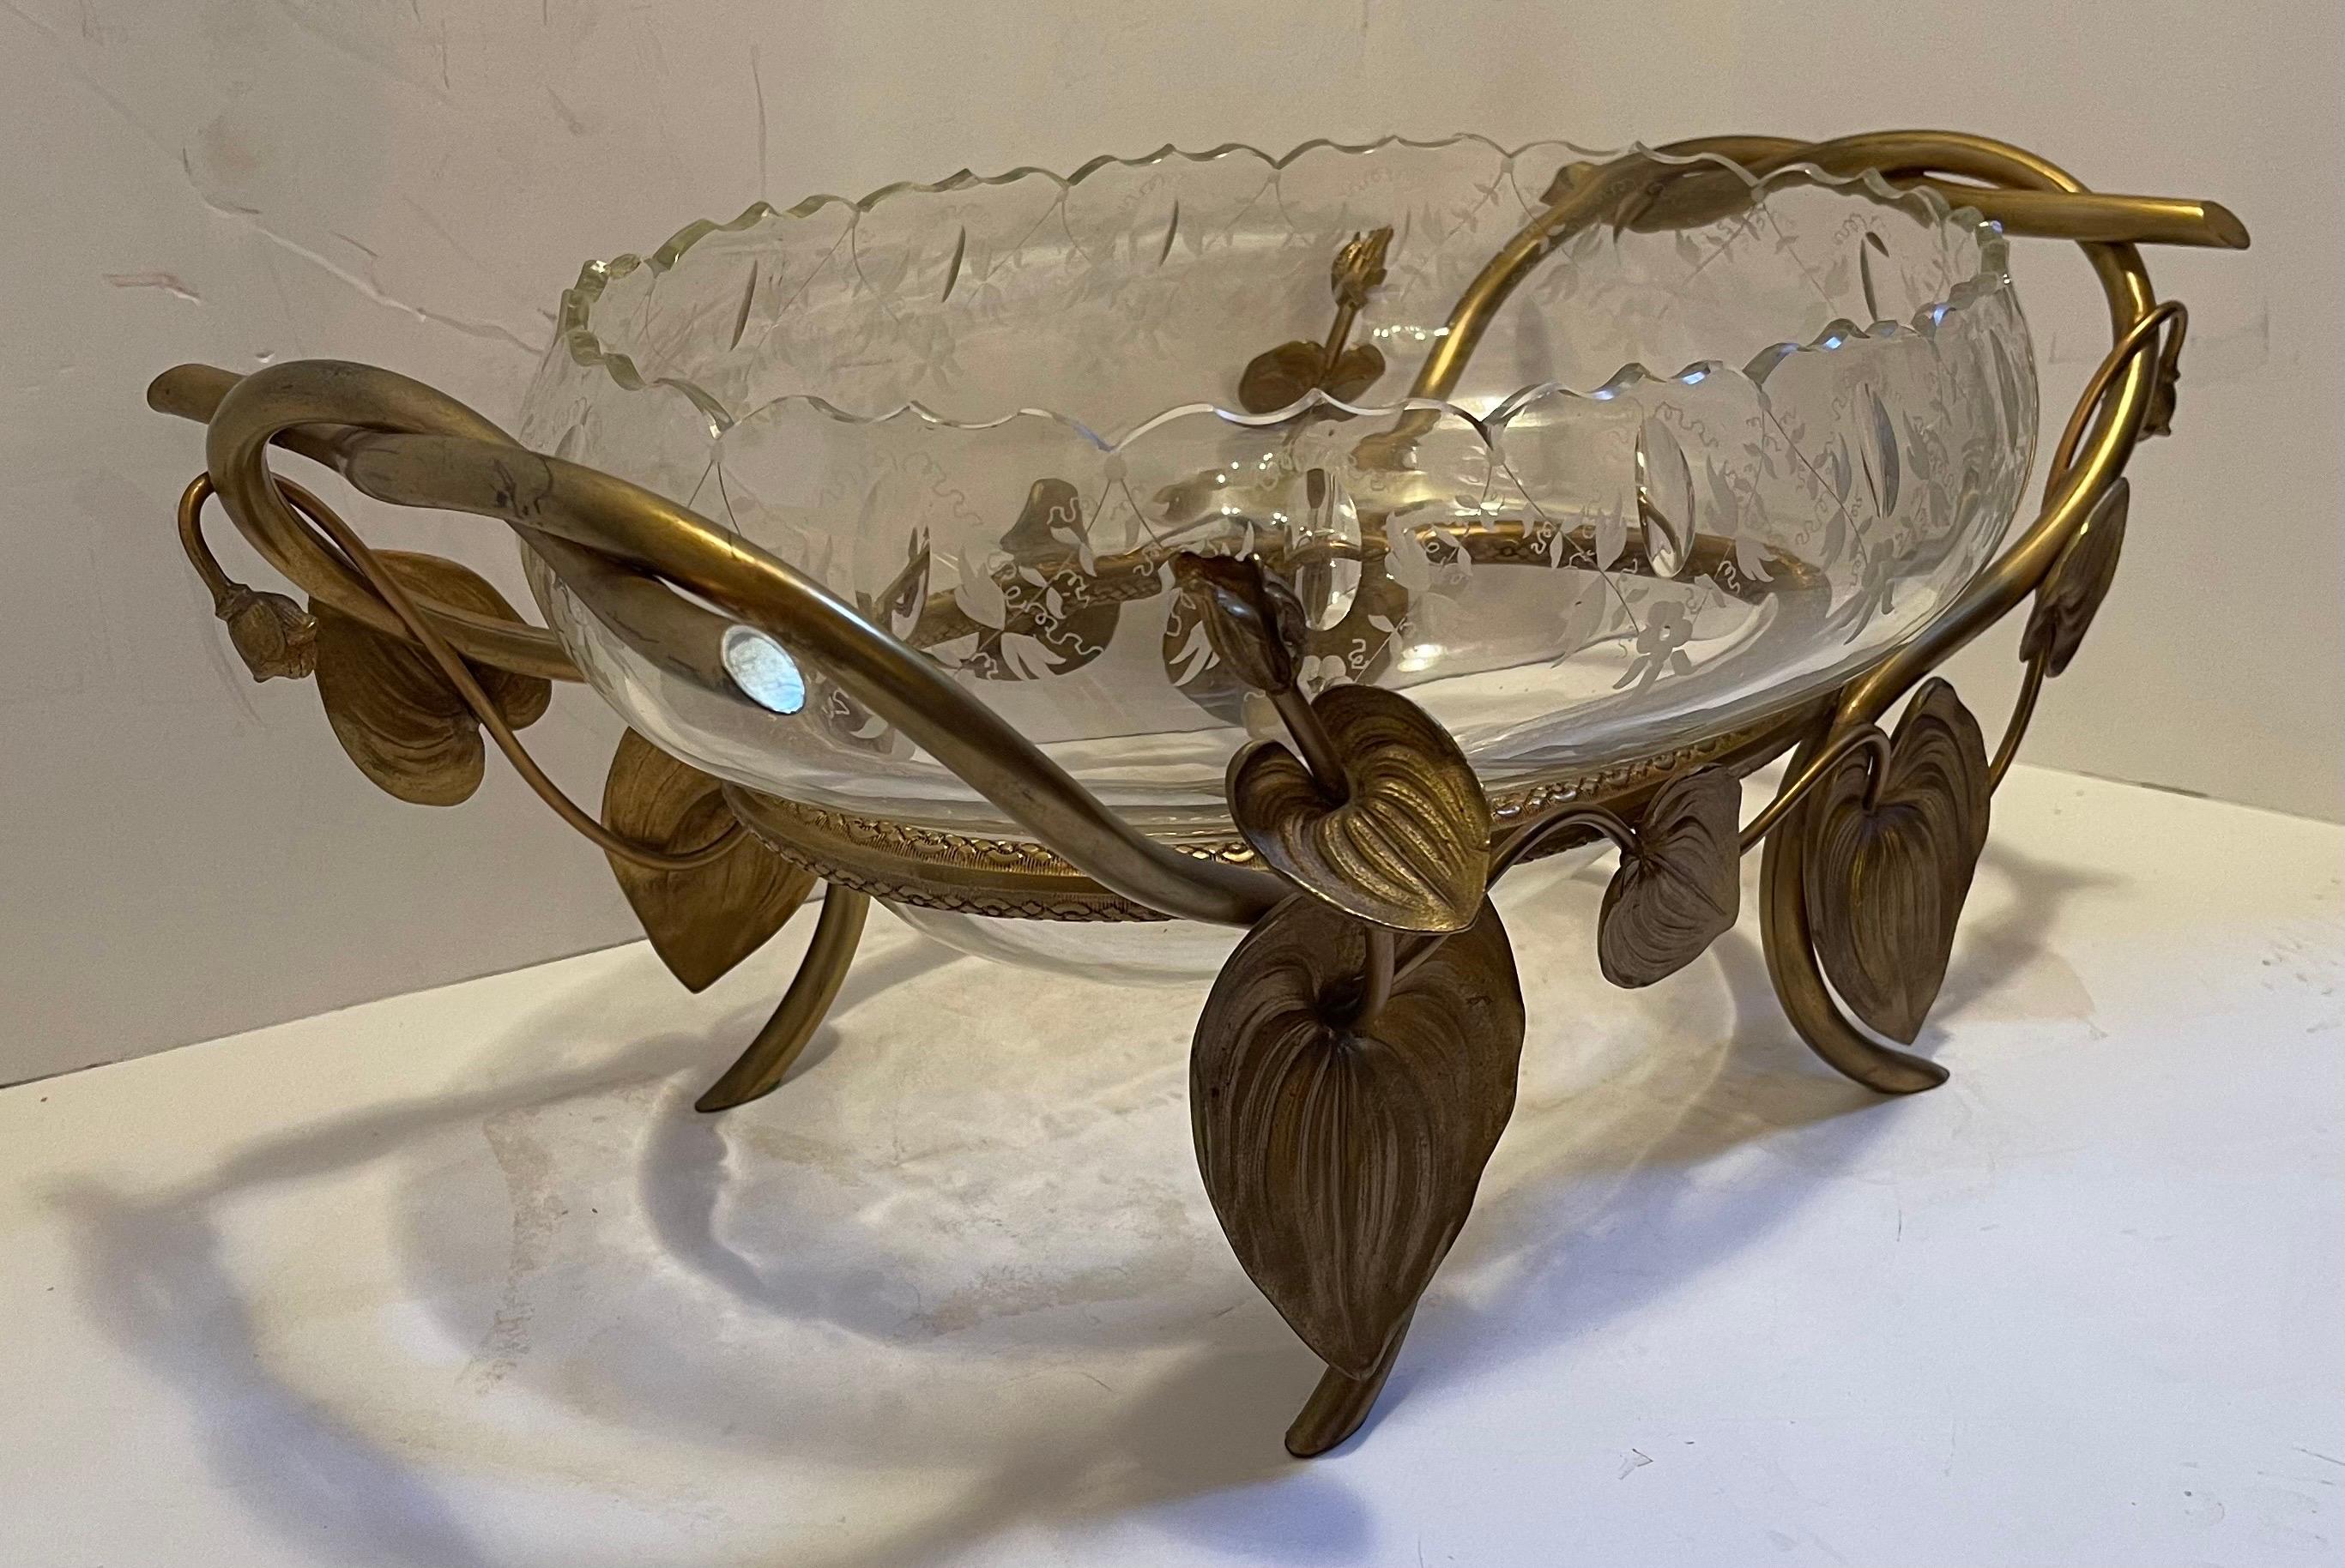 20th Century Wonderful Large French Art Nouveau Ormolu Bronze Oval Etched Crystal Centerpiece